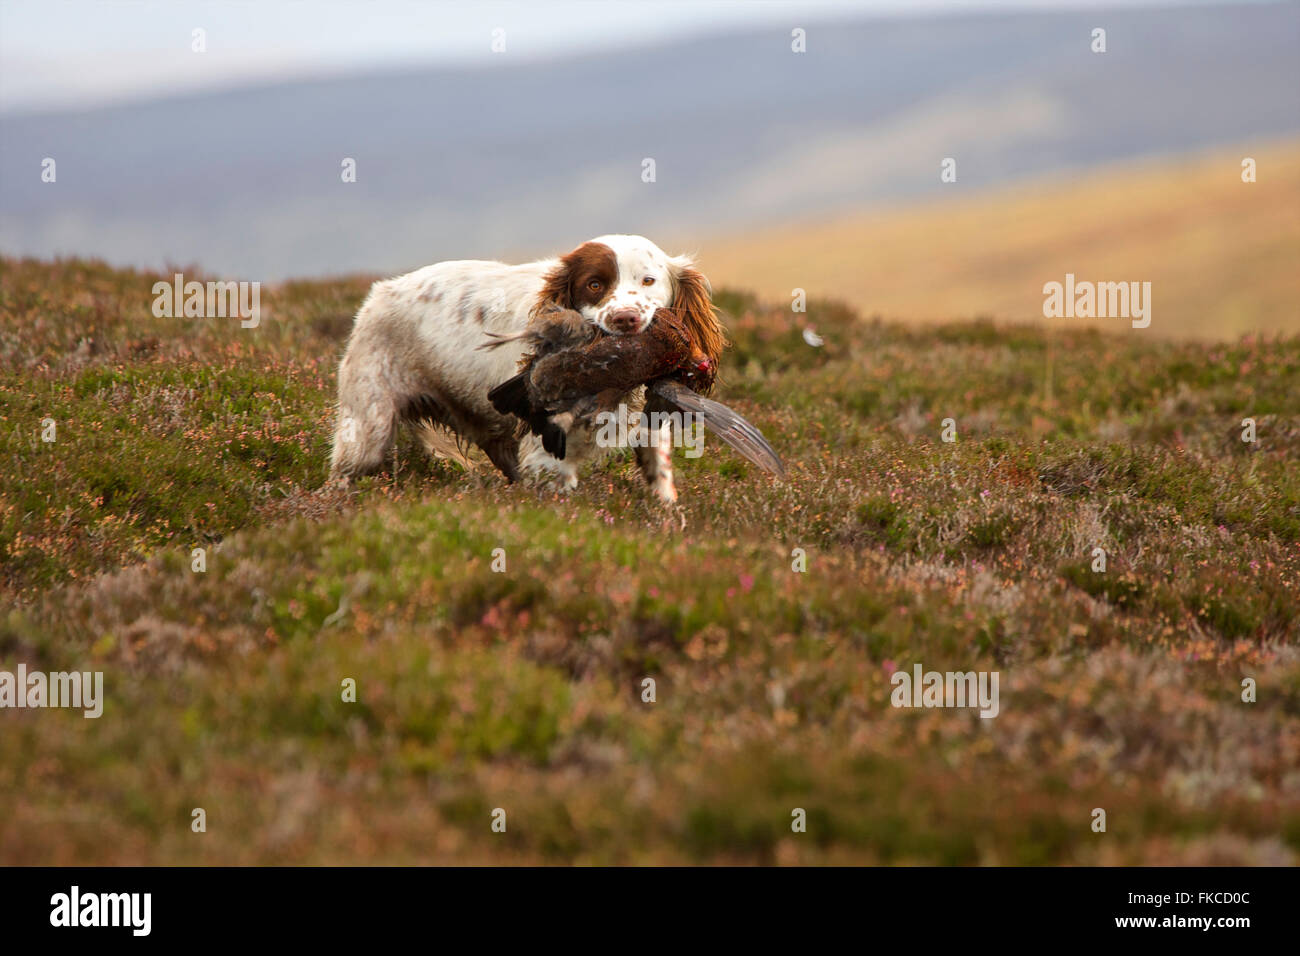 English Springer Spaniel dog with a grouse in its mouth, Scottish Moors Stock Photo